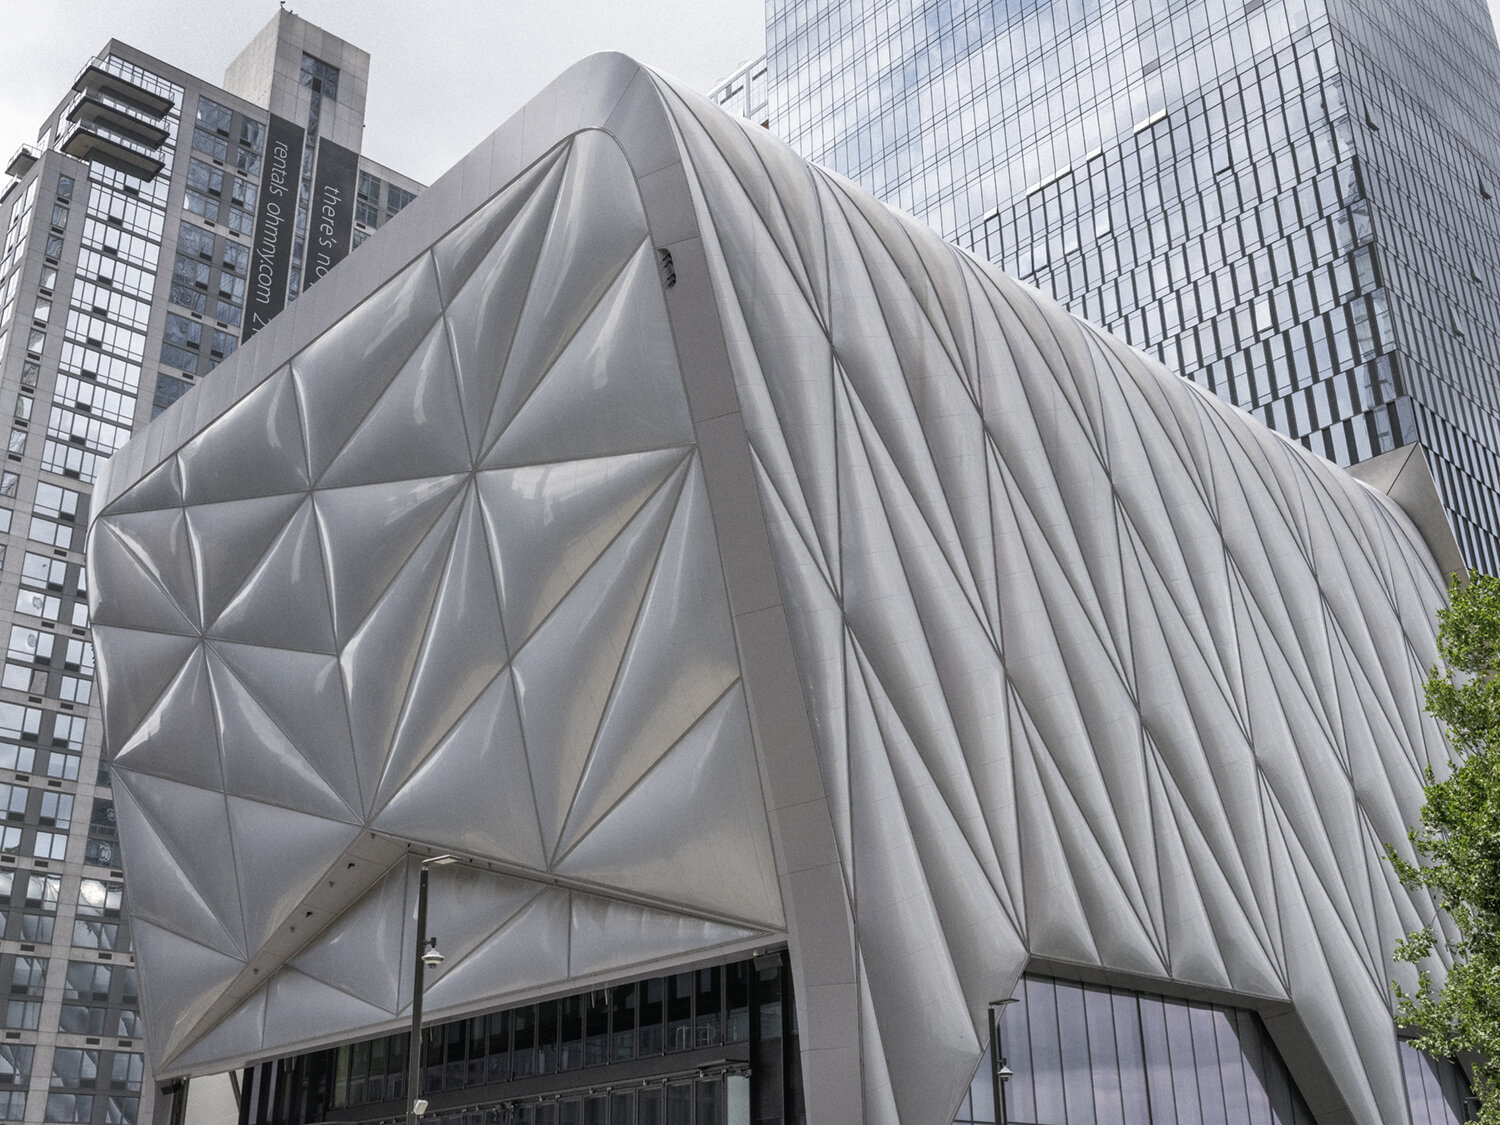 The Shed, Diller Scofidio + Renfro, located in Hudson Yards, NYC. 